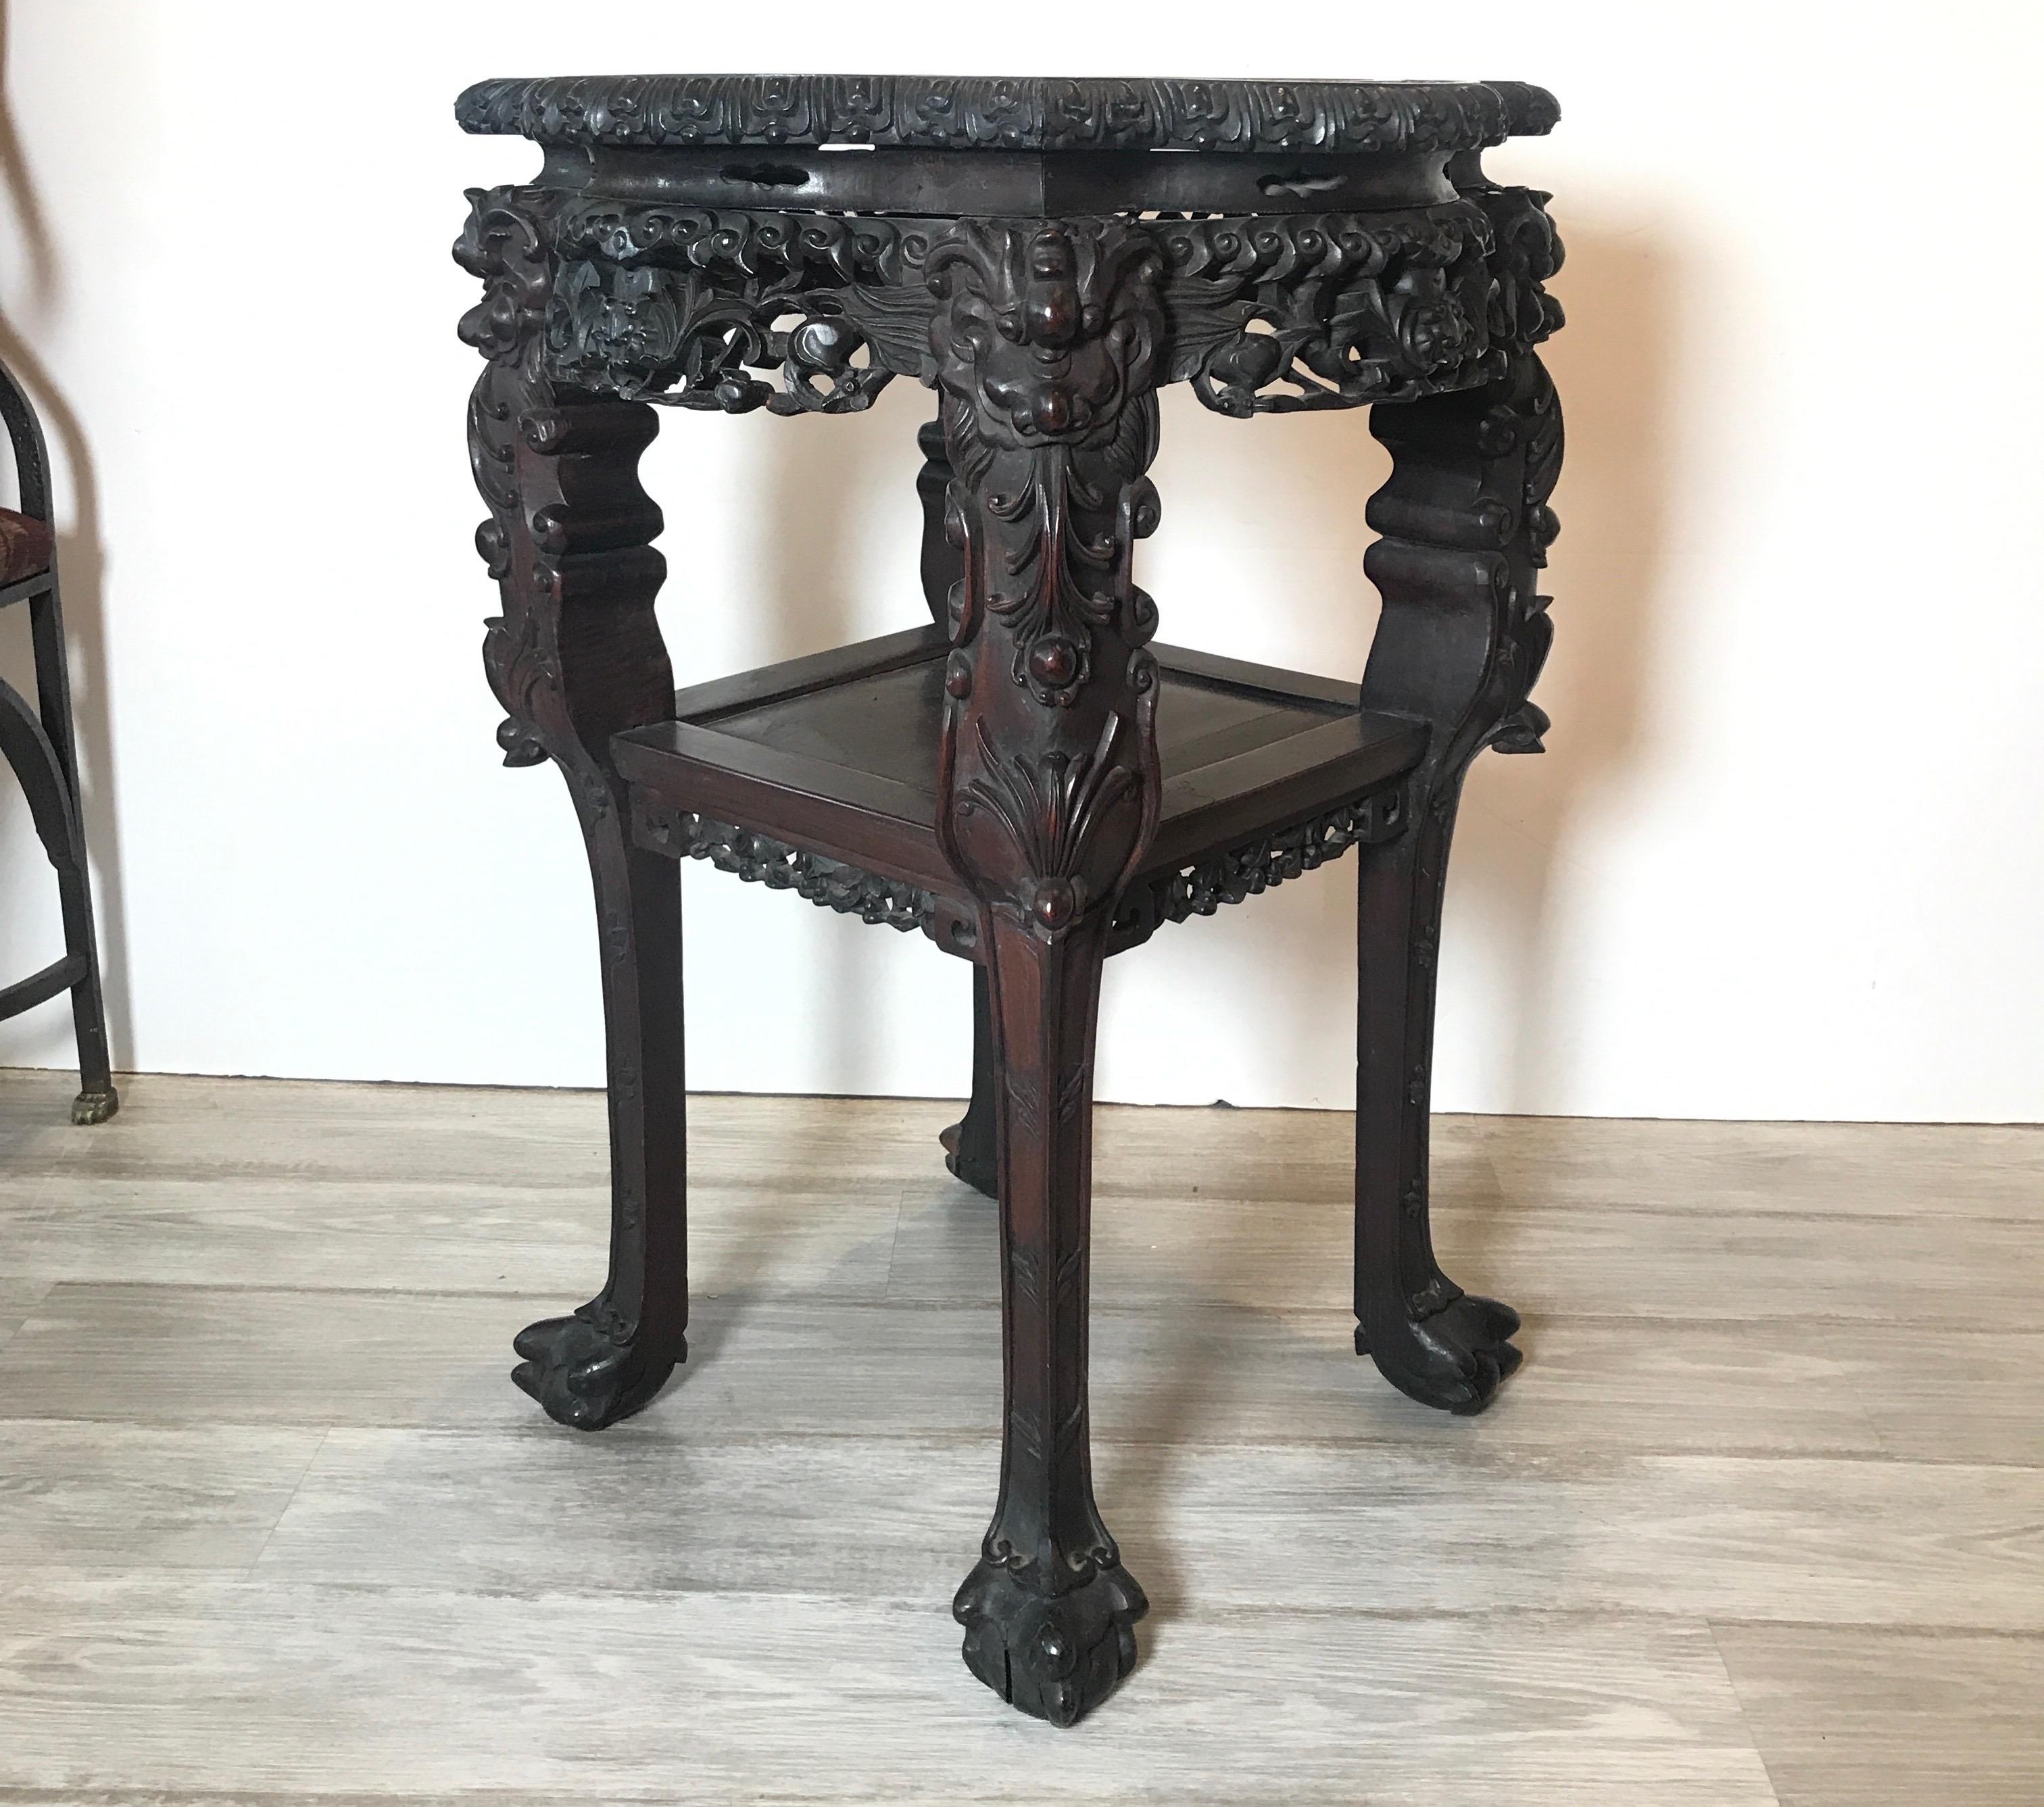 Rosewood heavily carved Chinese marble top two-tier stand, circa 1870s
Nice larger than usual size Chinese stand in very good condition.
Dimensions: 22